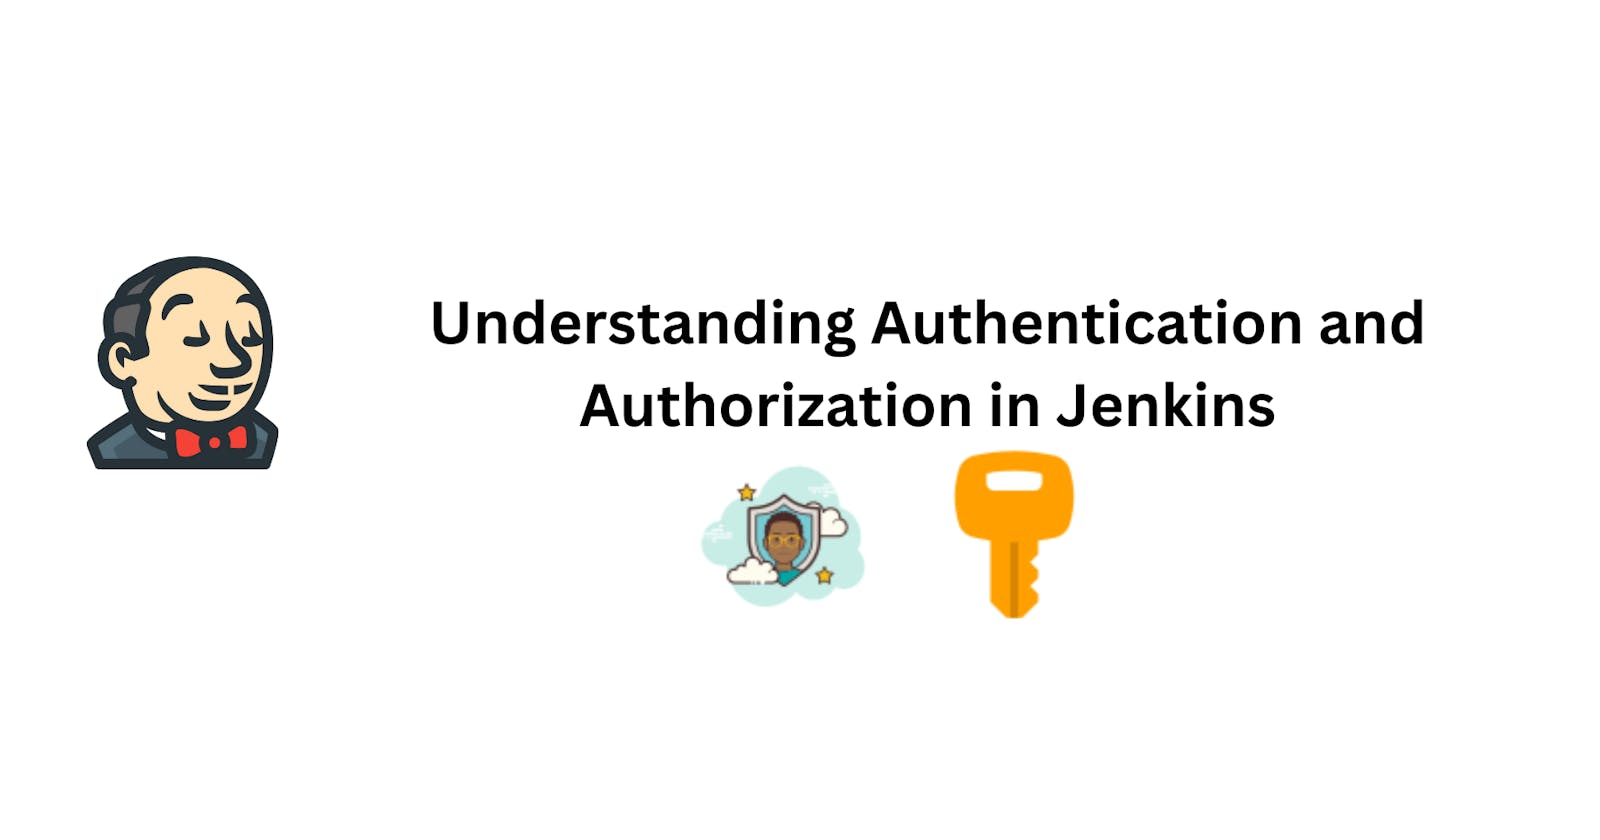 Understanding Authentication and Authorization in Jenkins 🔑